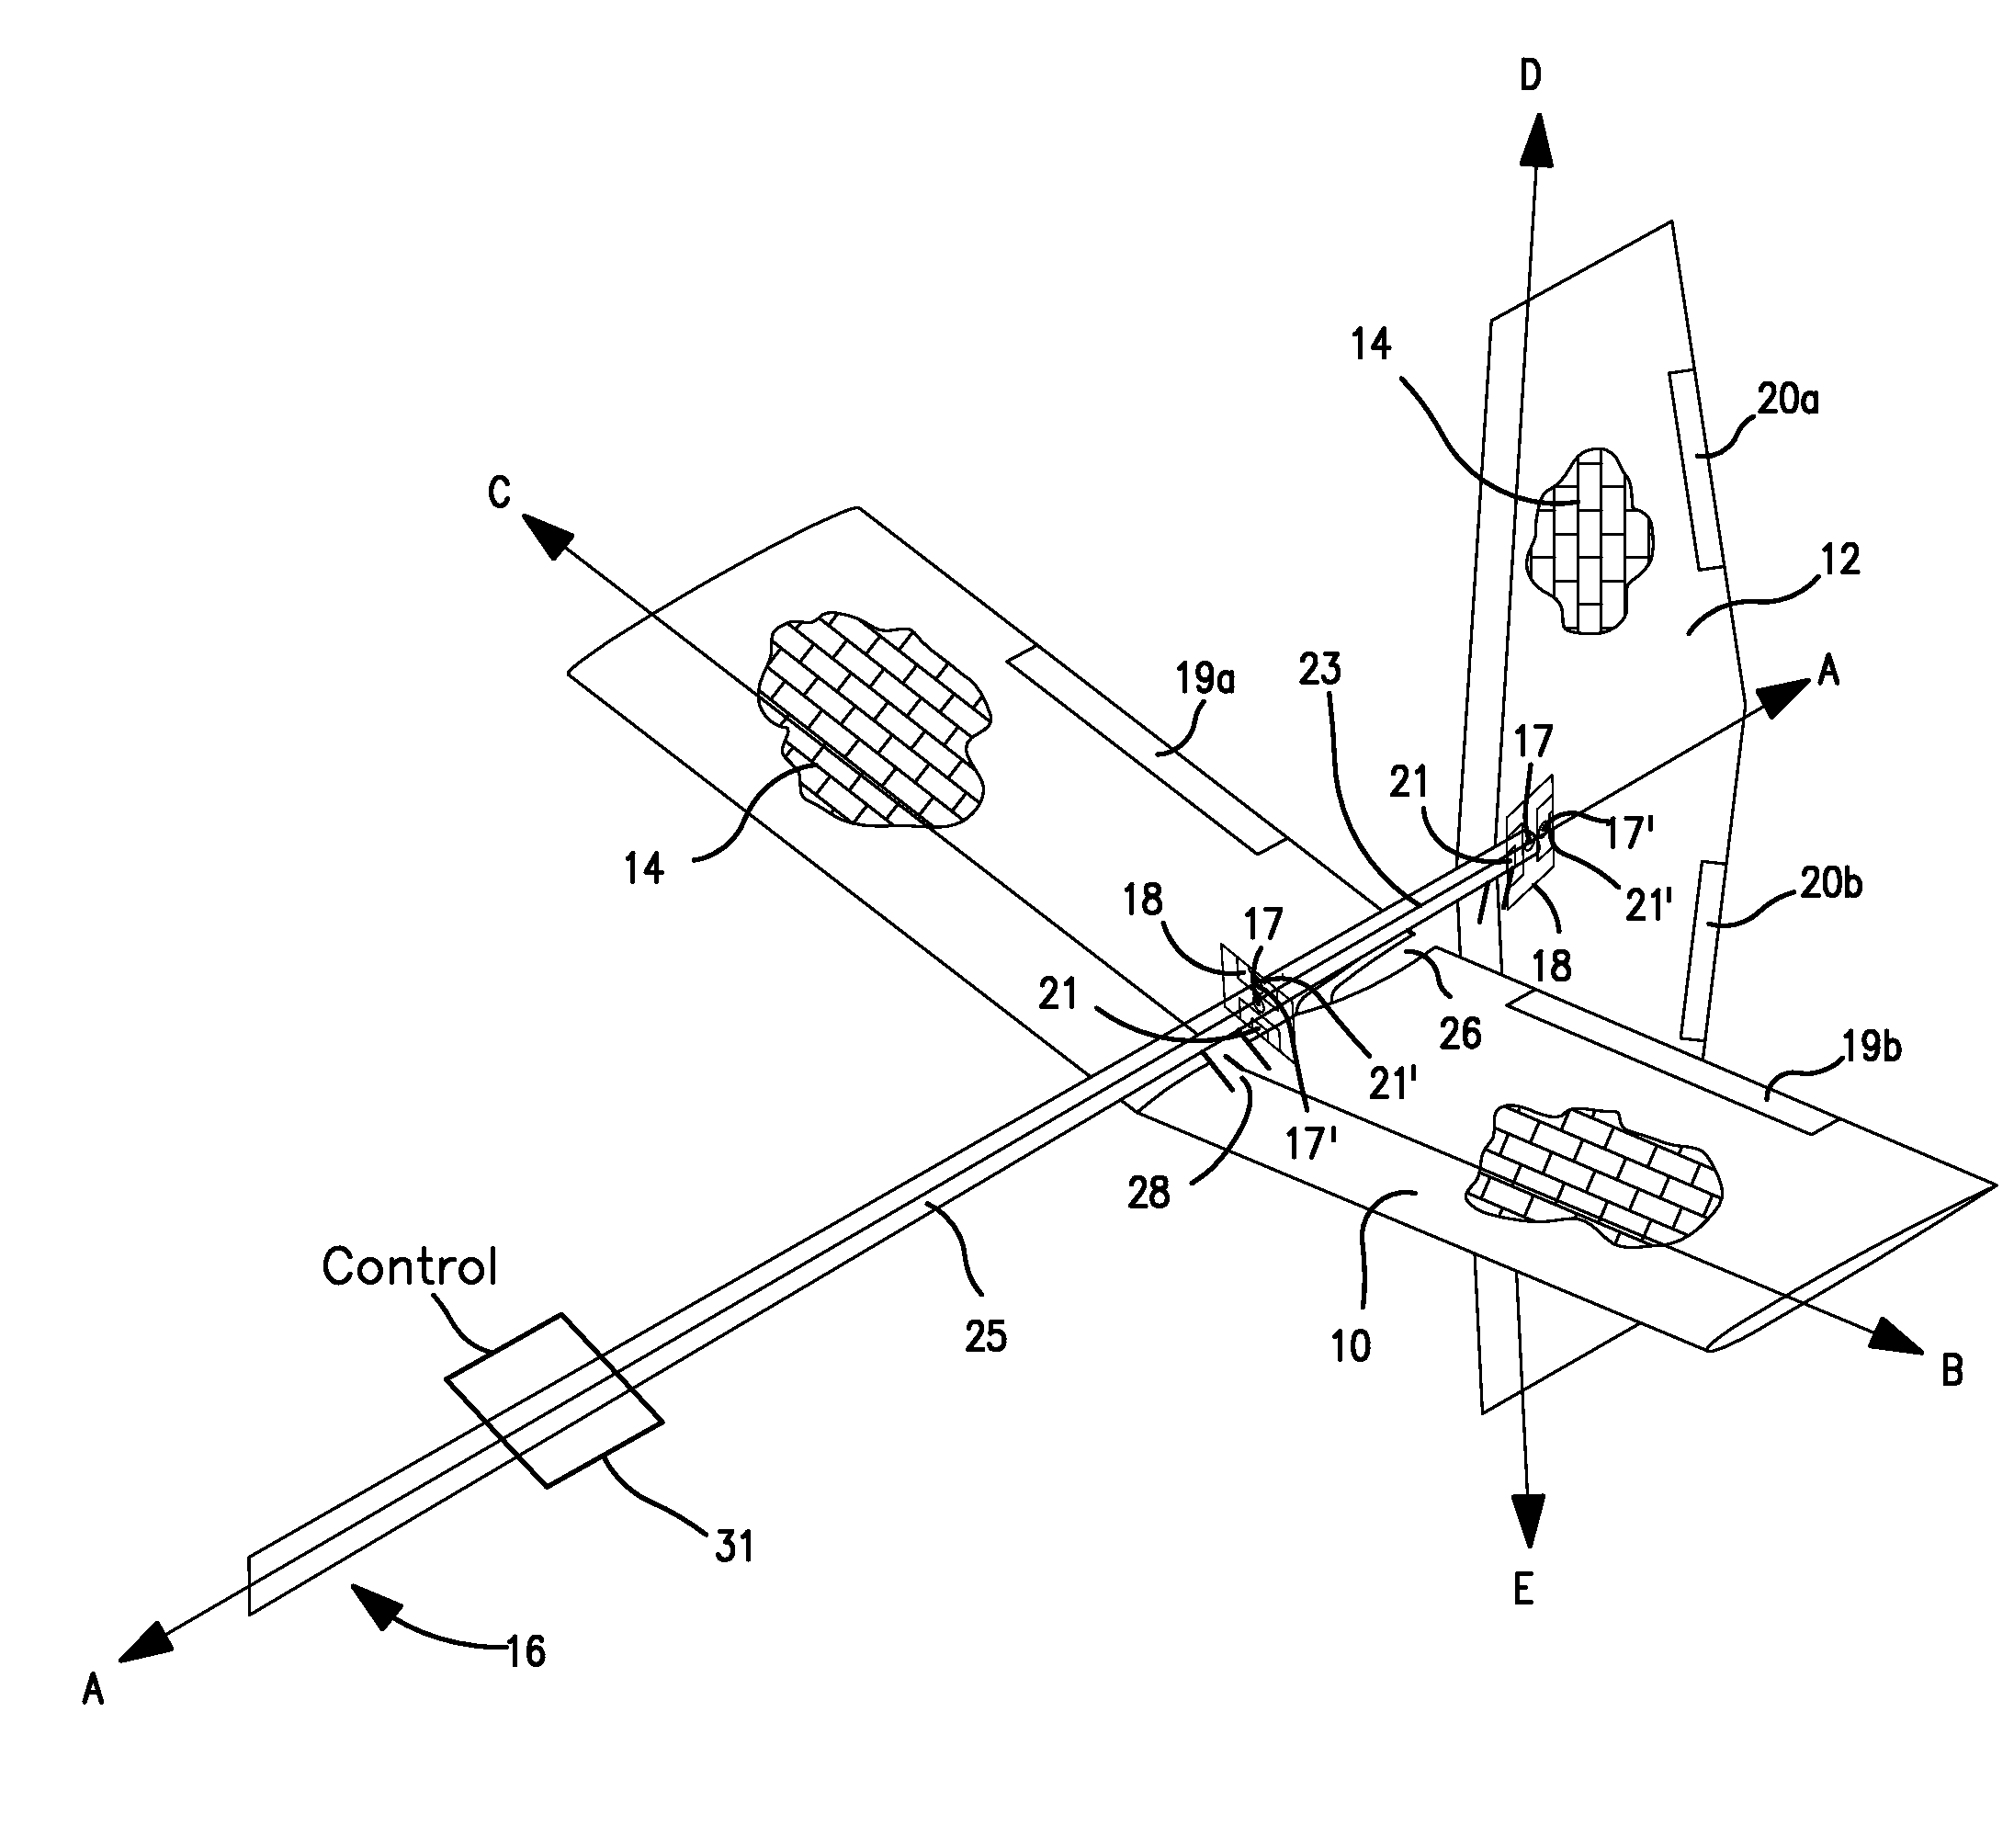 Tail-mounted pointable solar panels for solar-powered aircraft